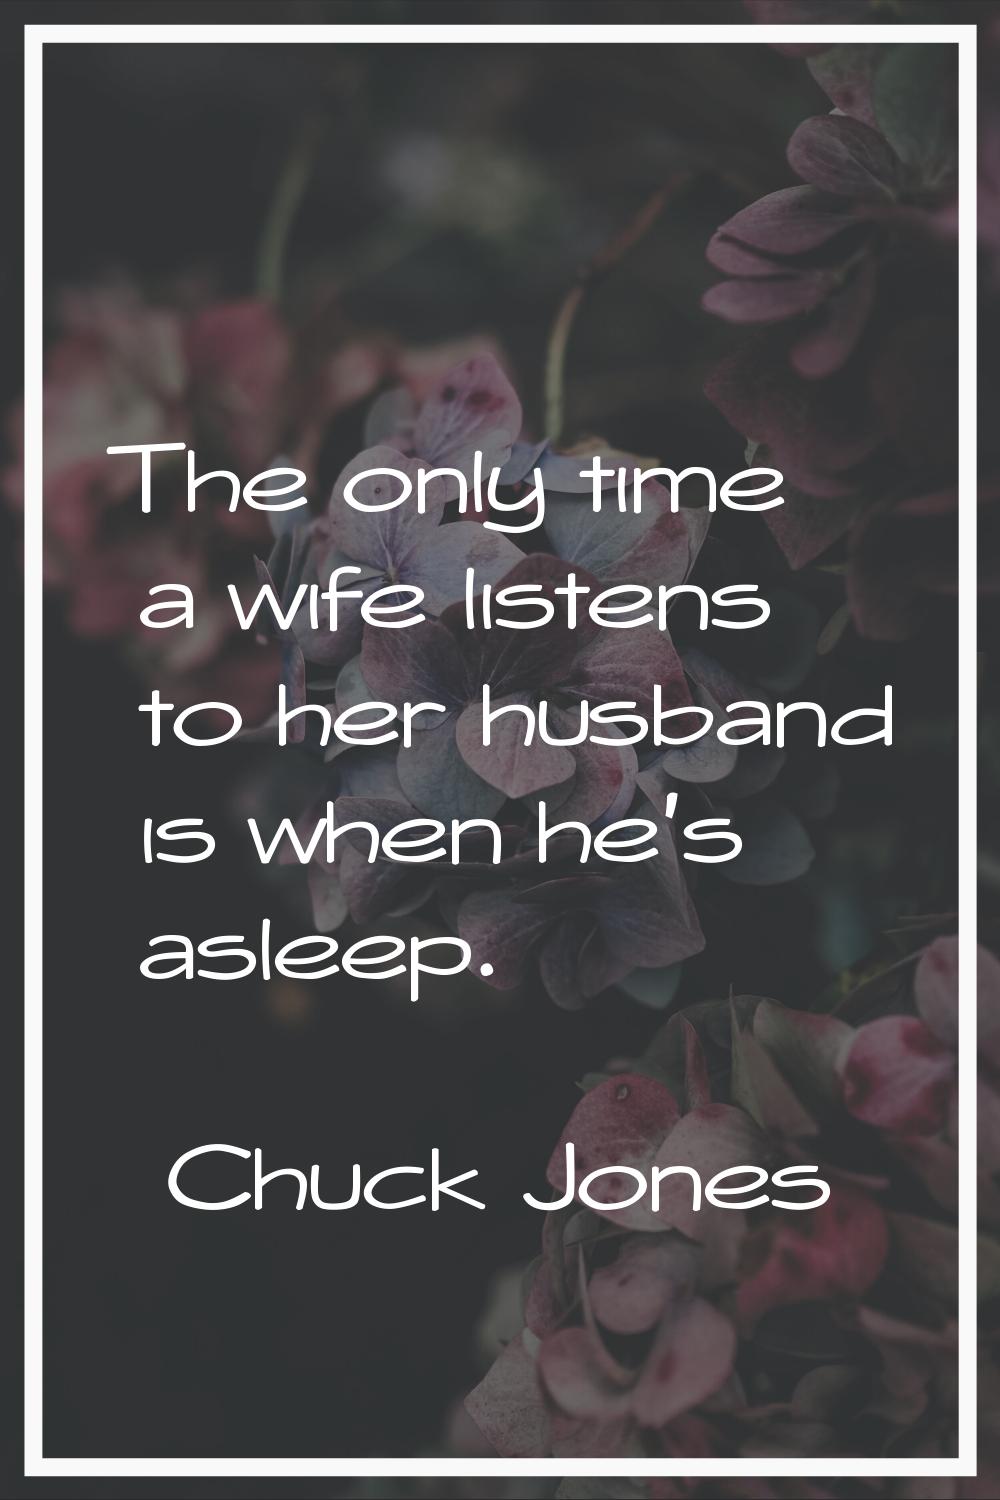 The only time a wife listens to her husband is when he's asleep.